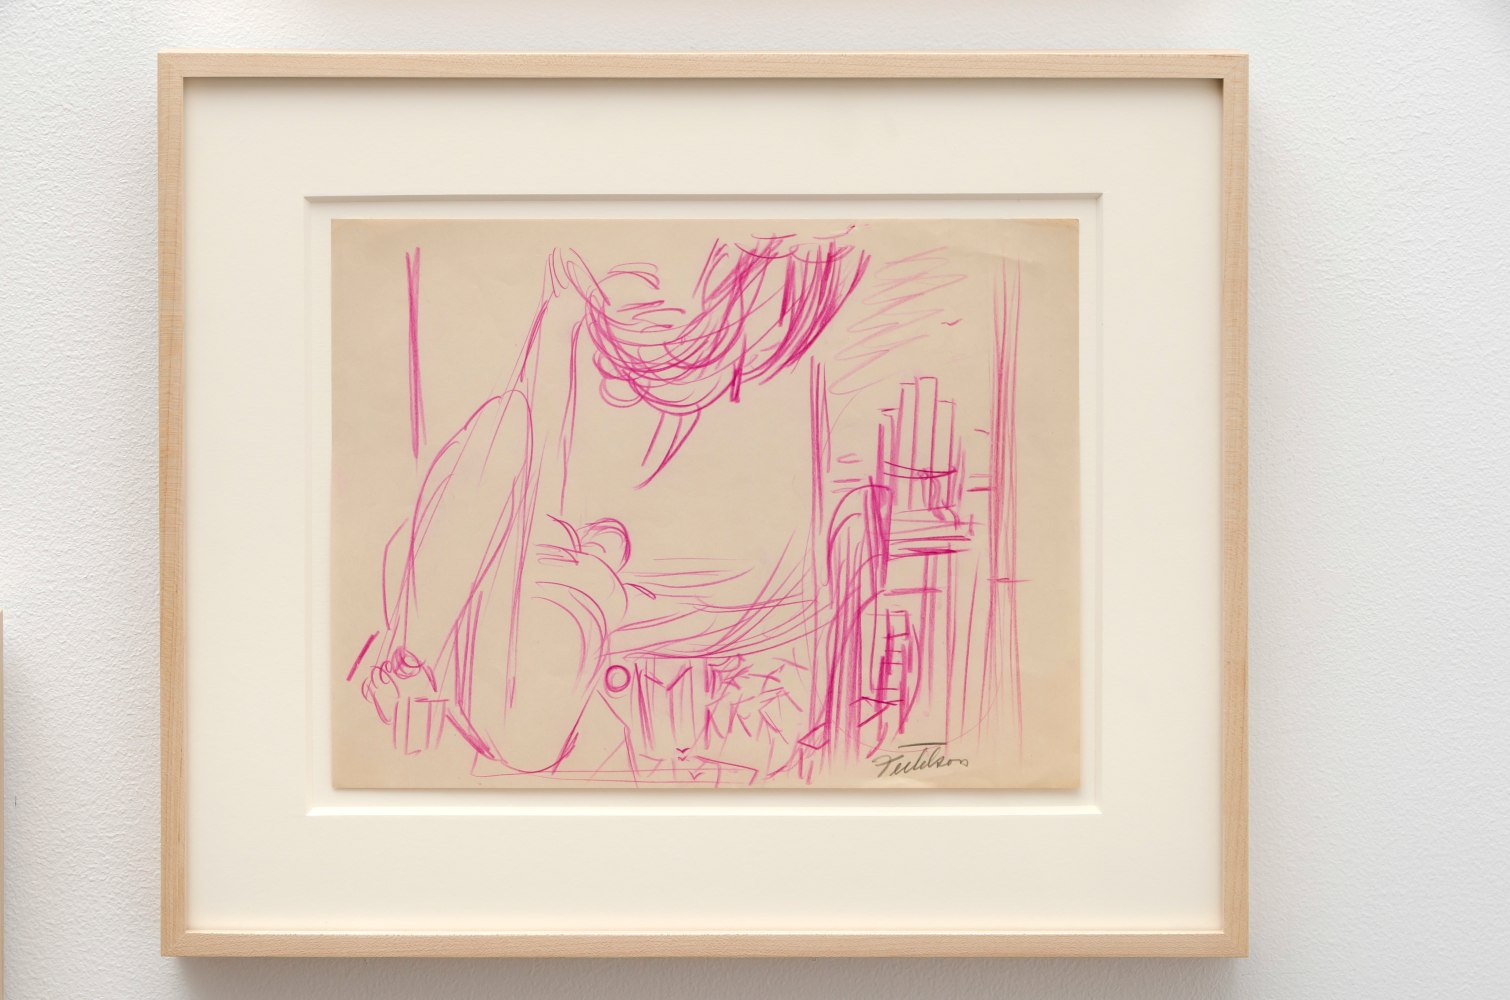 Lorser Feitelson (1898-1978) Study for Flight Over New York, c. 1935 colored pencil on paper 8 1/2 x 11 inches; 21.6 x 27.9 centimeters LSFA# 13857